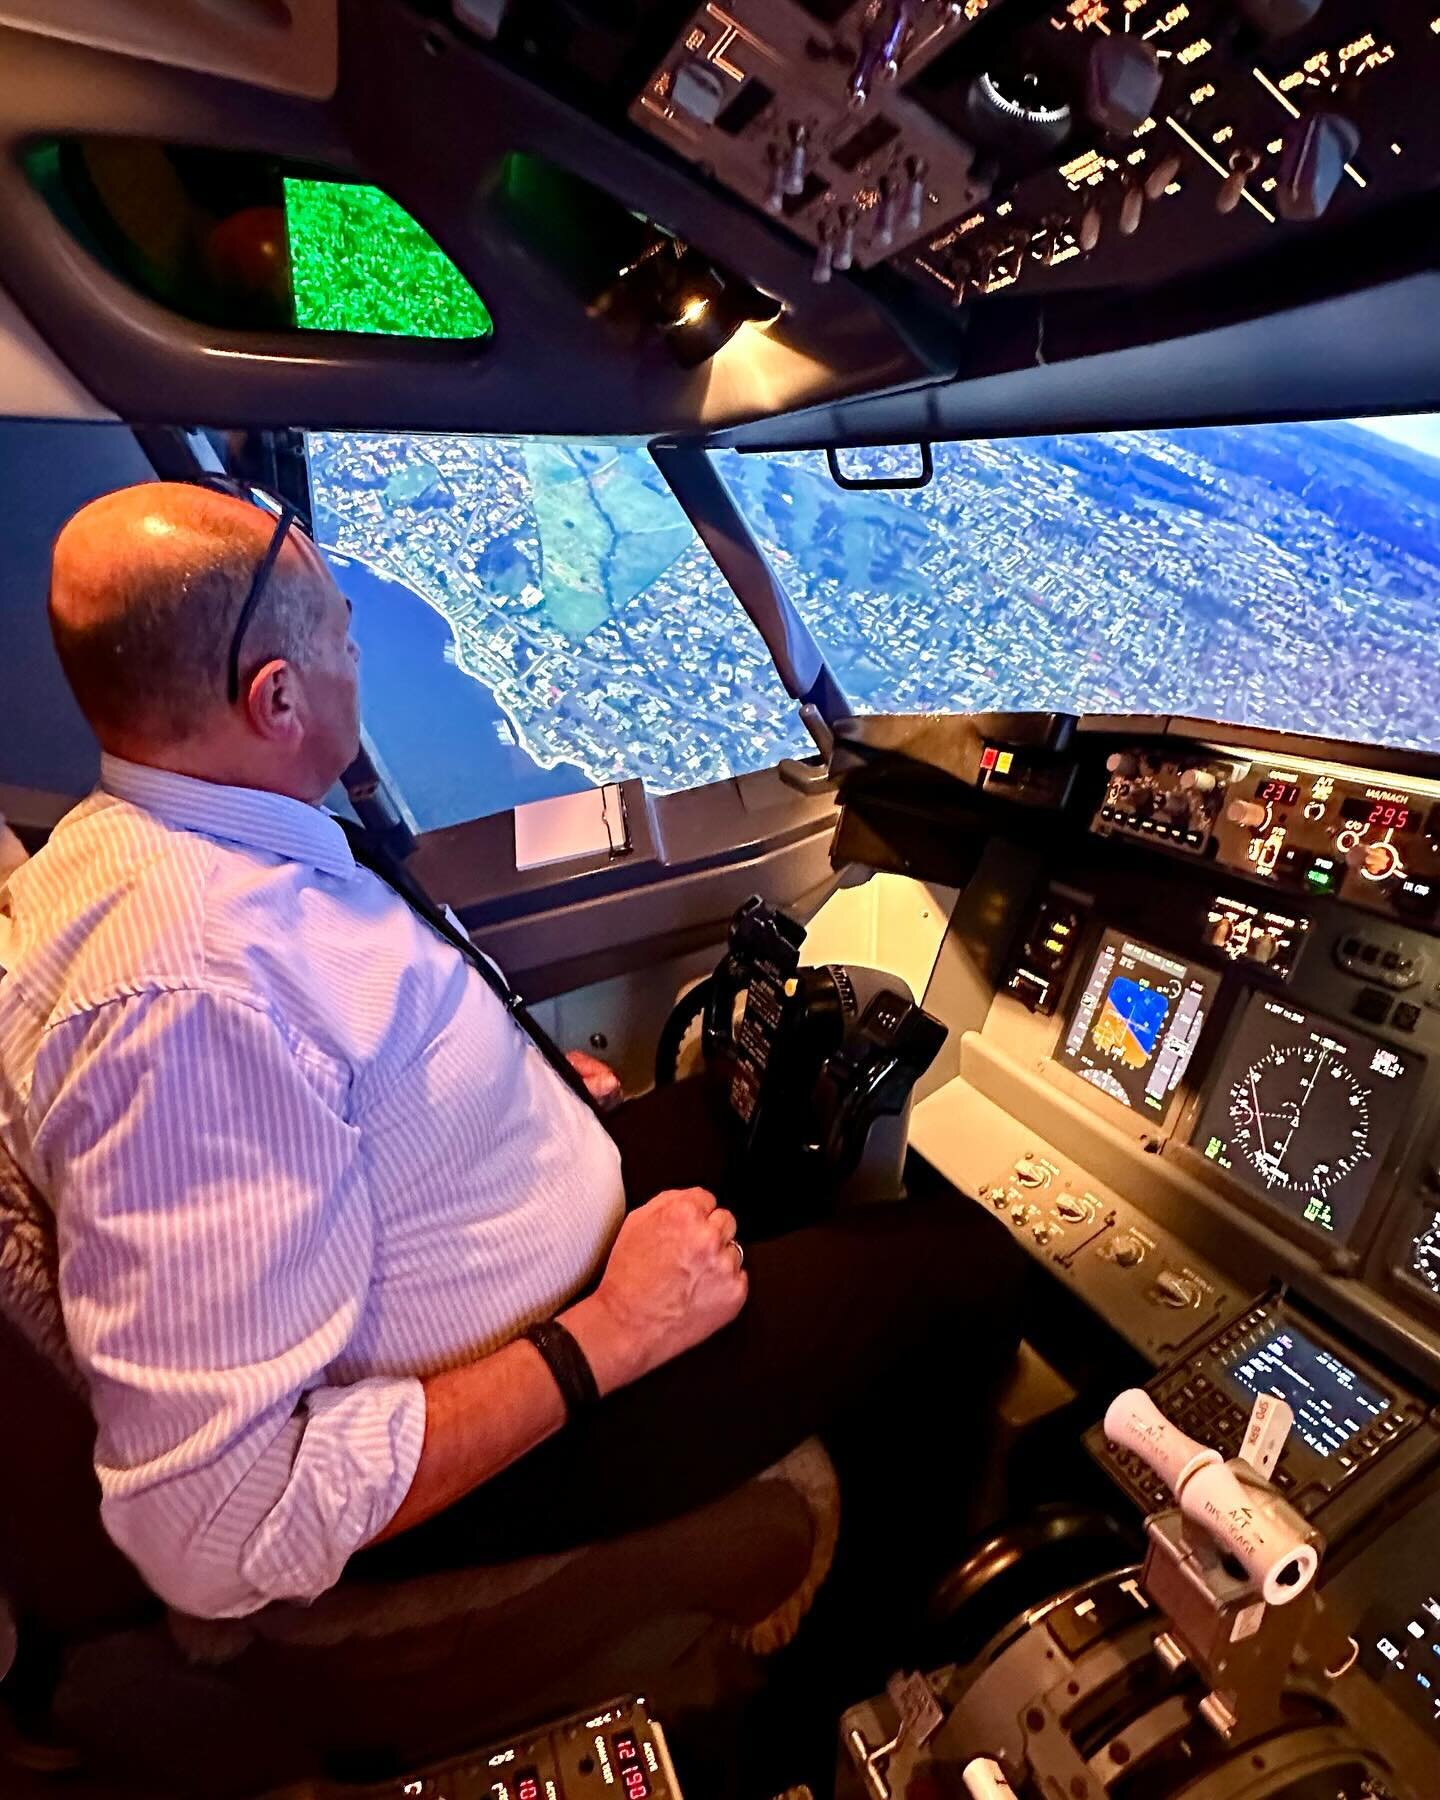 A customer finds his home in AKL while flying the simulator #737 #737simulator #jetexchch